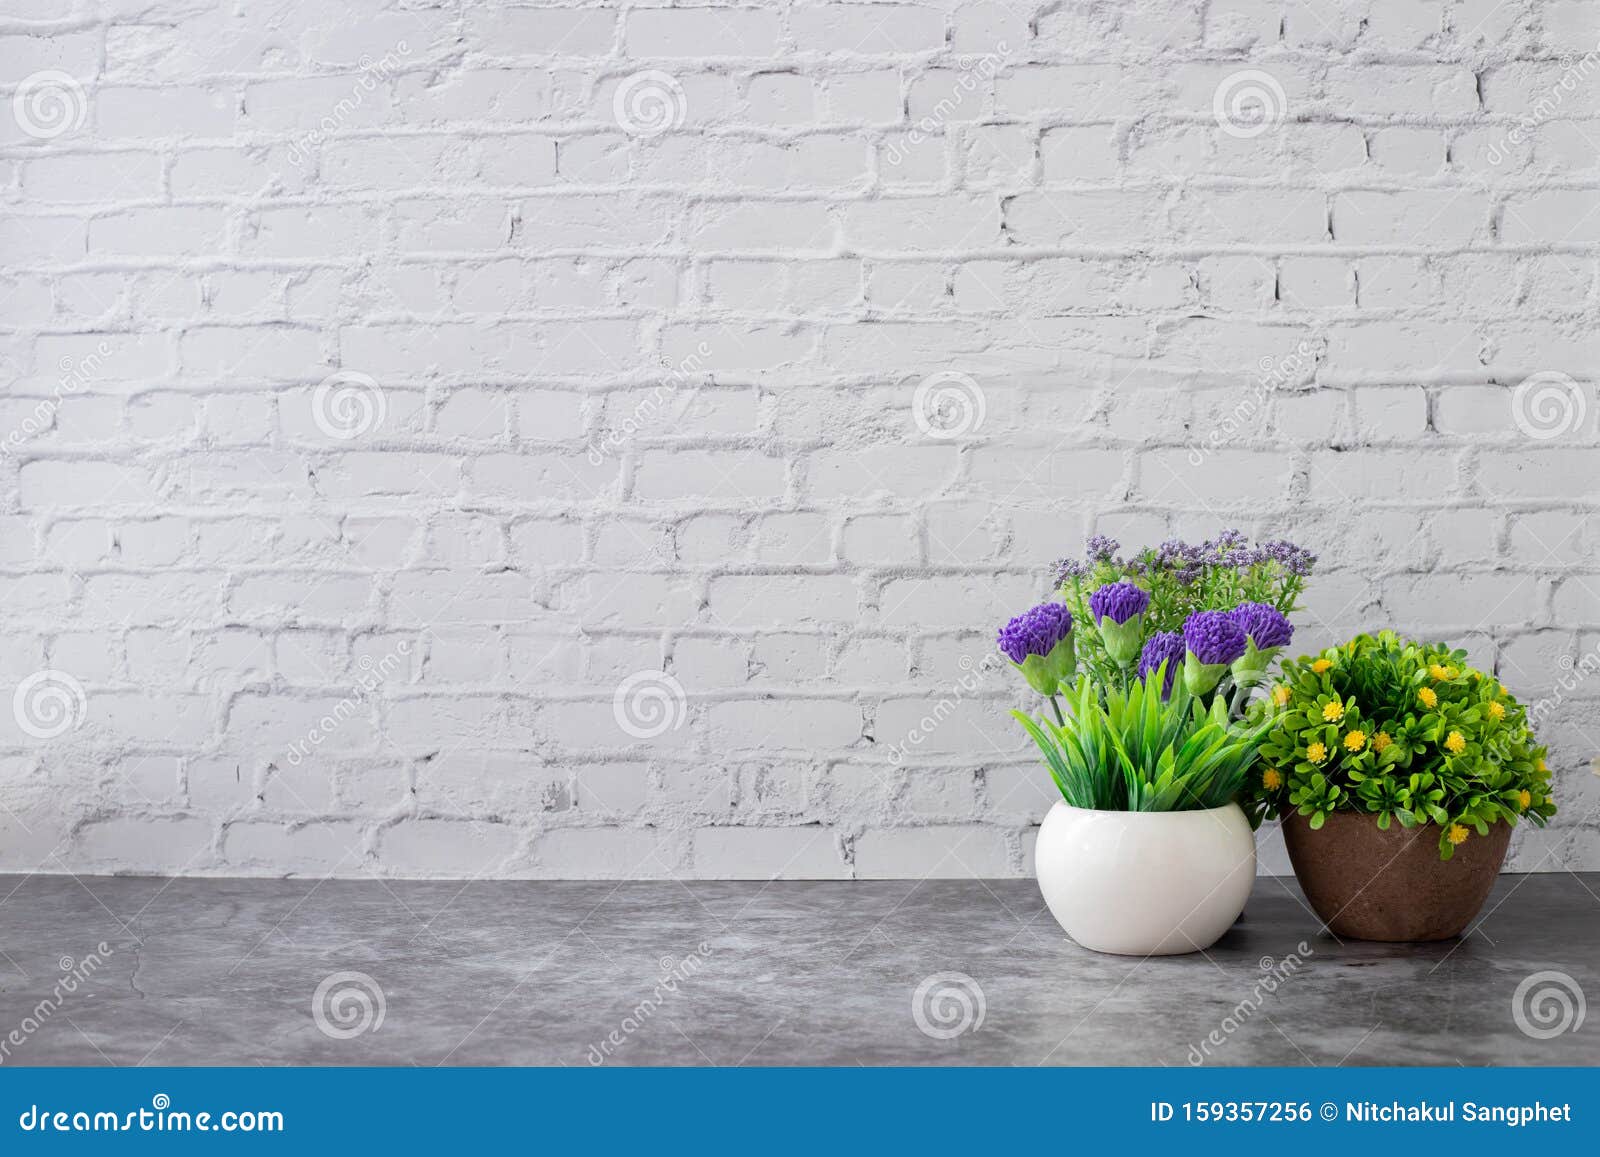 Dried Plant Pot On White Brick Wall Texture Background Stock Photo Image Of Room Plant